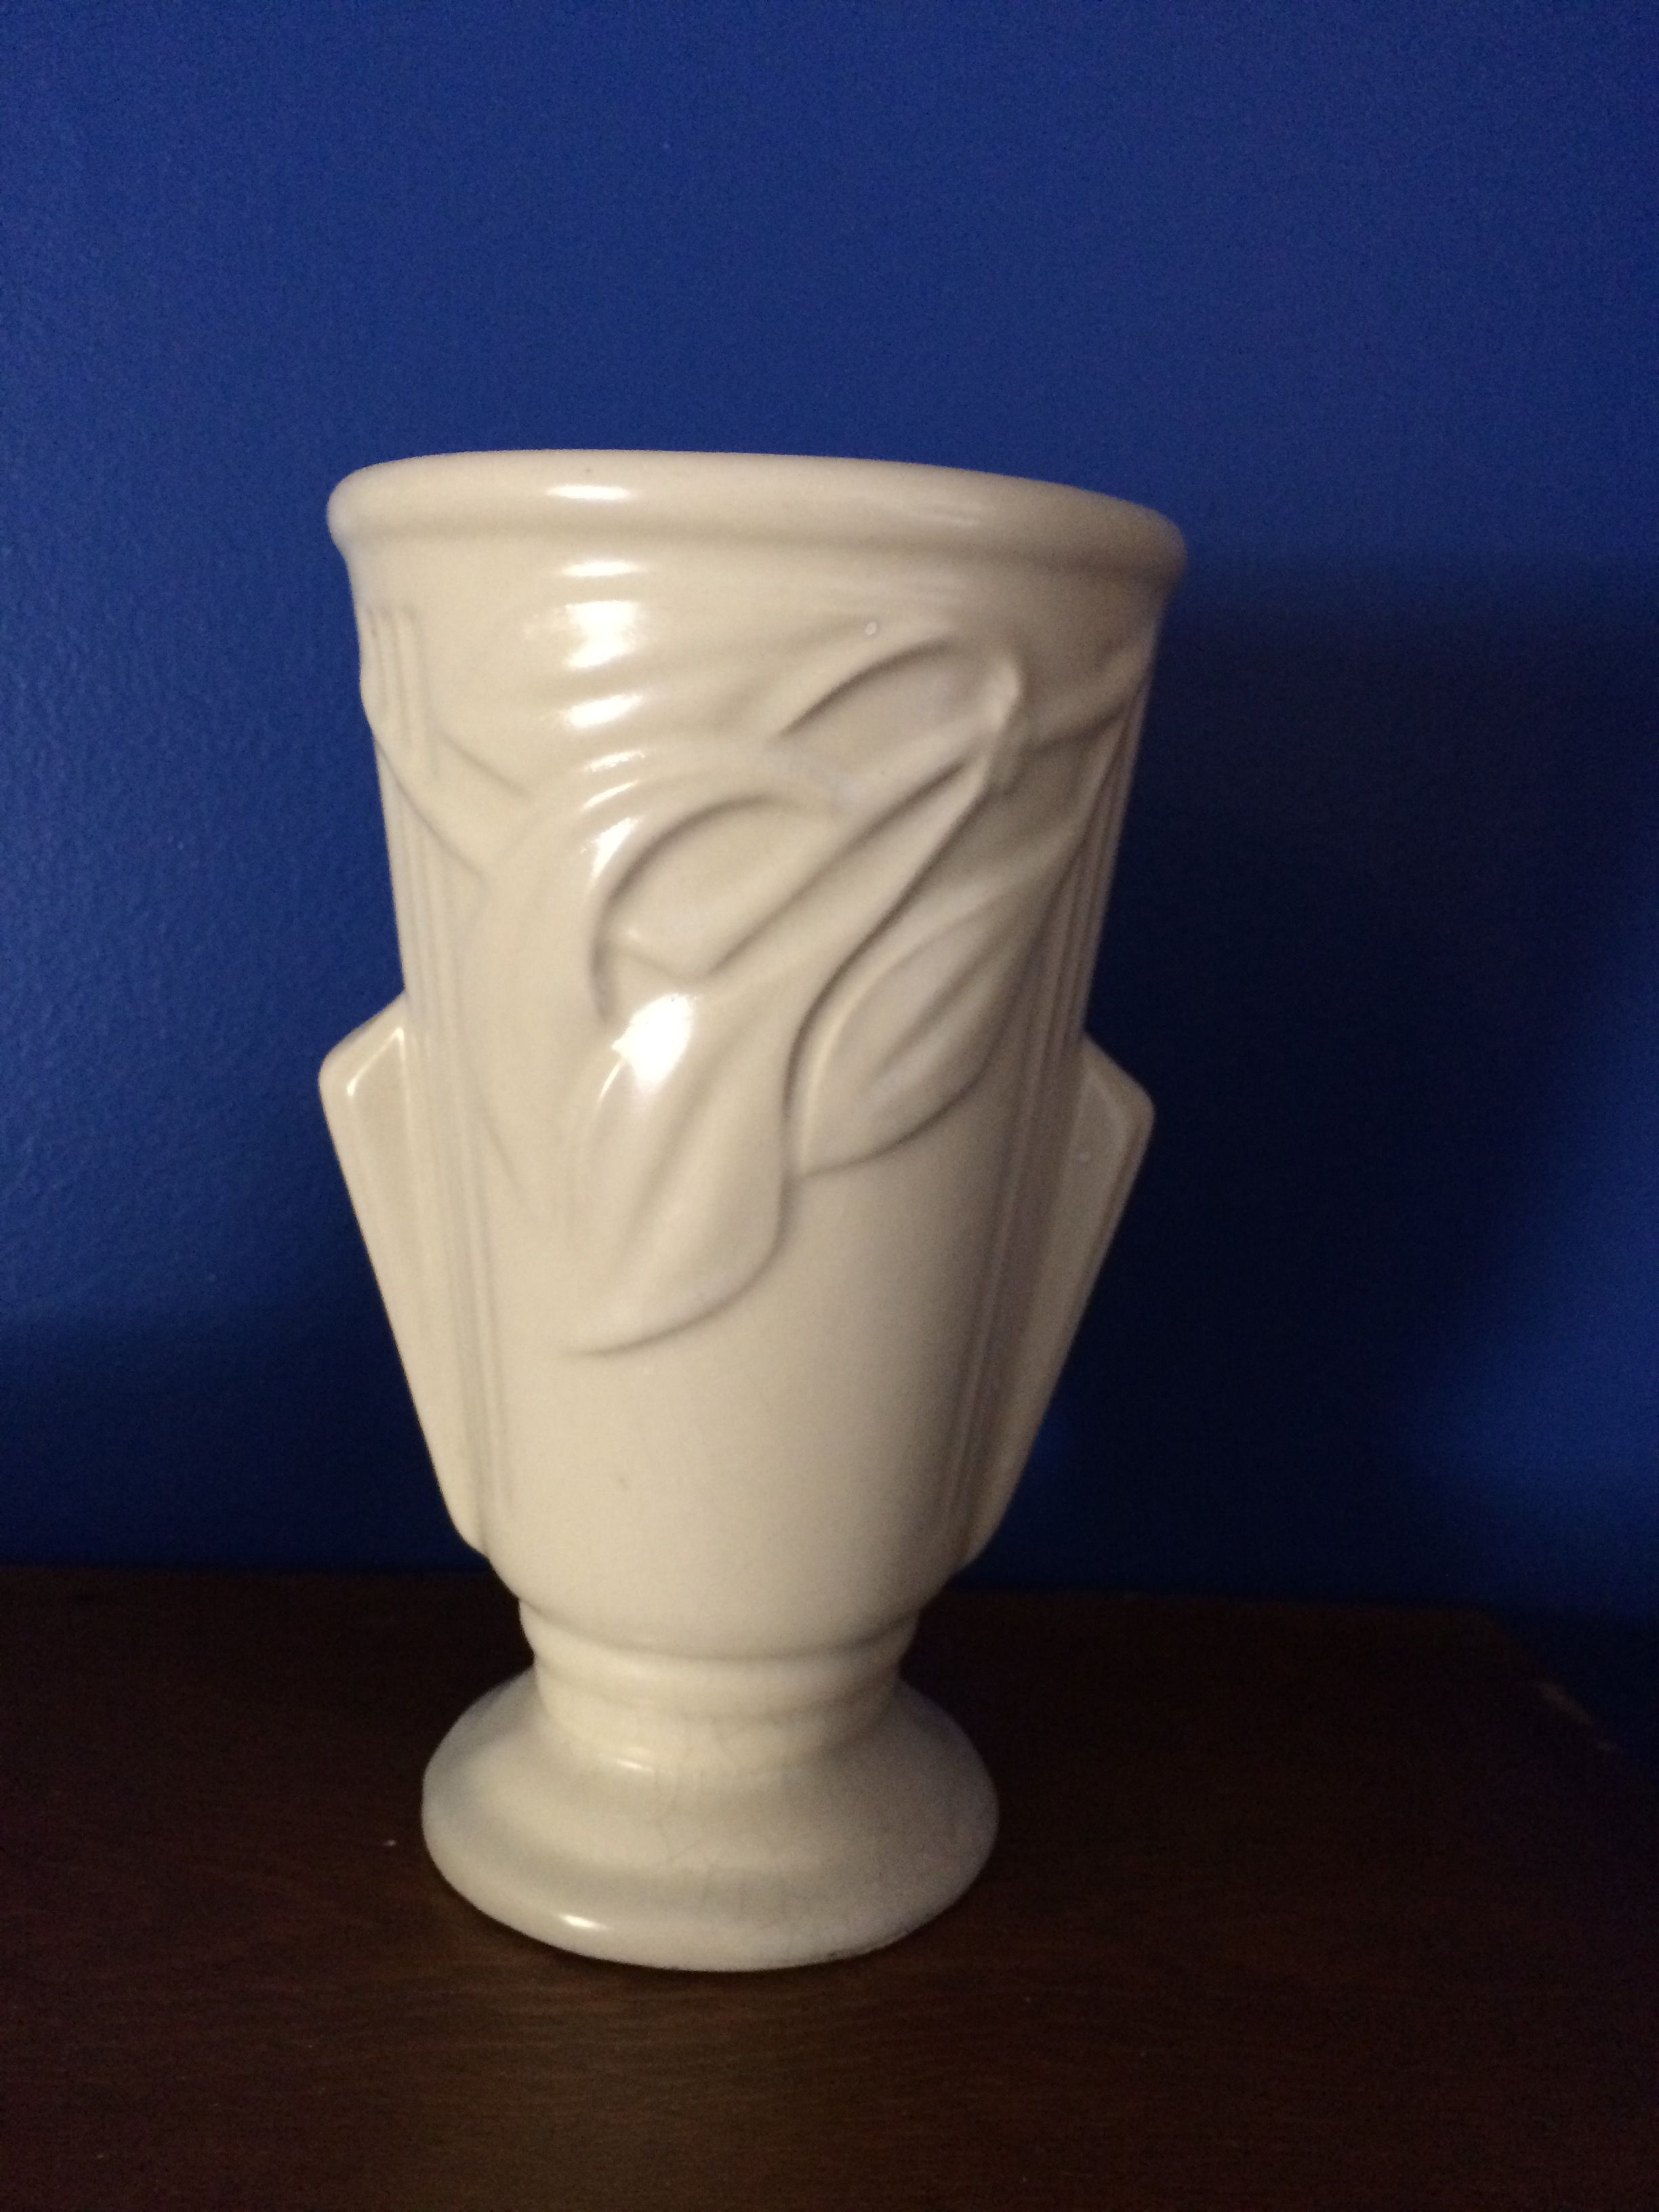 11 Perfect West Elm Flower Vase 2024 free download west elm flower vase of white vases for sale elegant pin by eugene hollon on art deco white with white vases for sale elegant pin by eugene hollon on art deco white vases pinterest